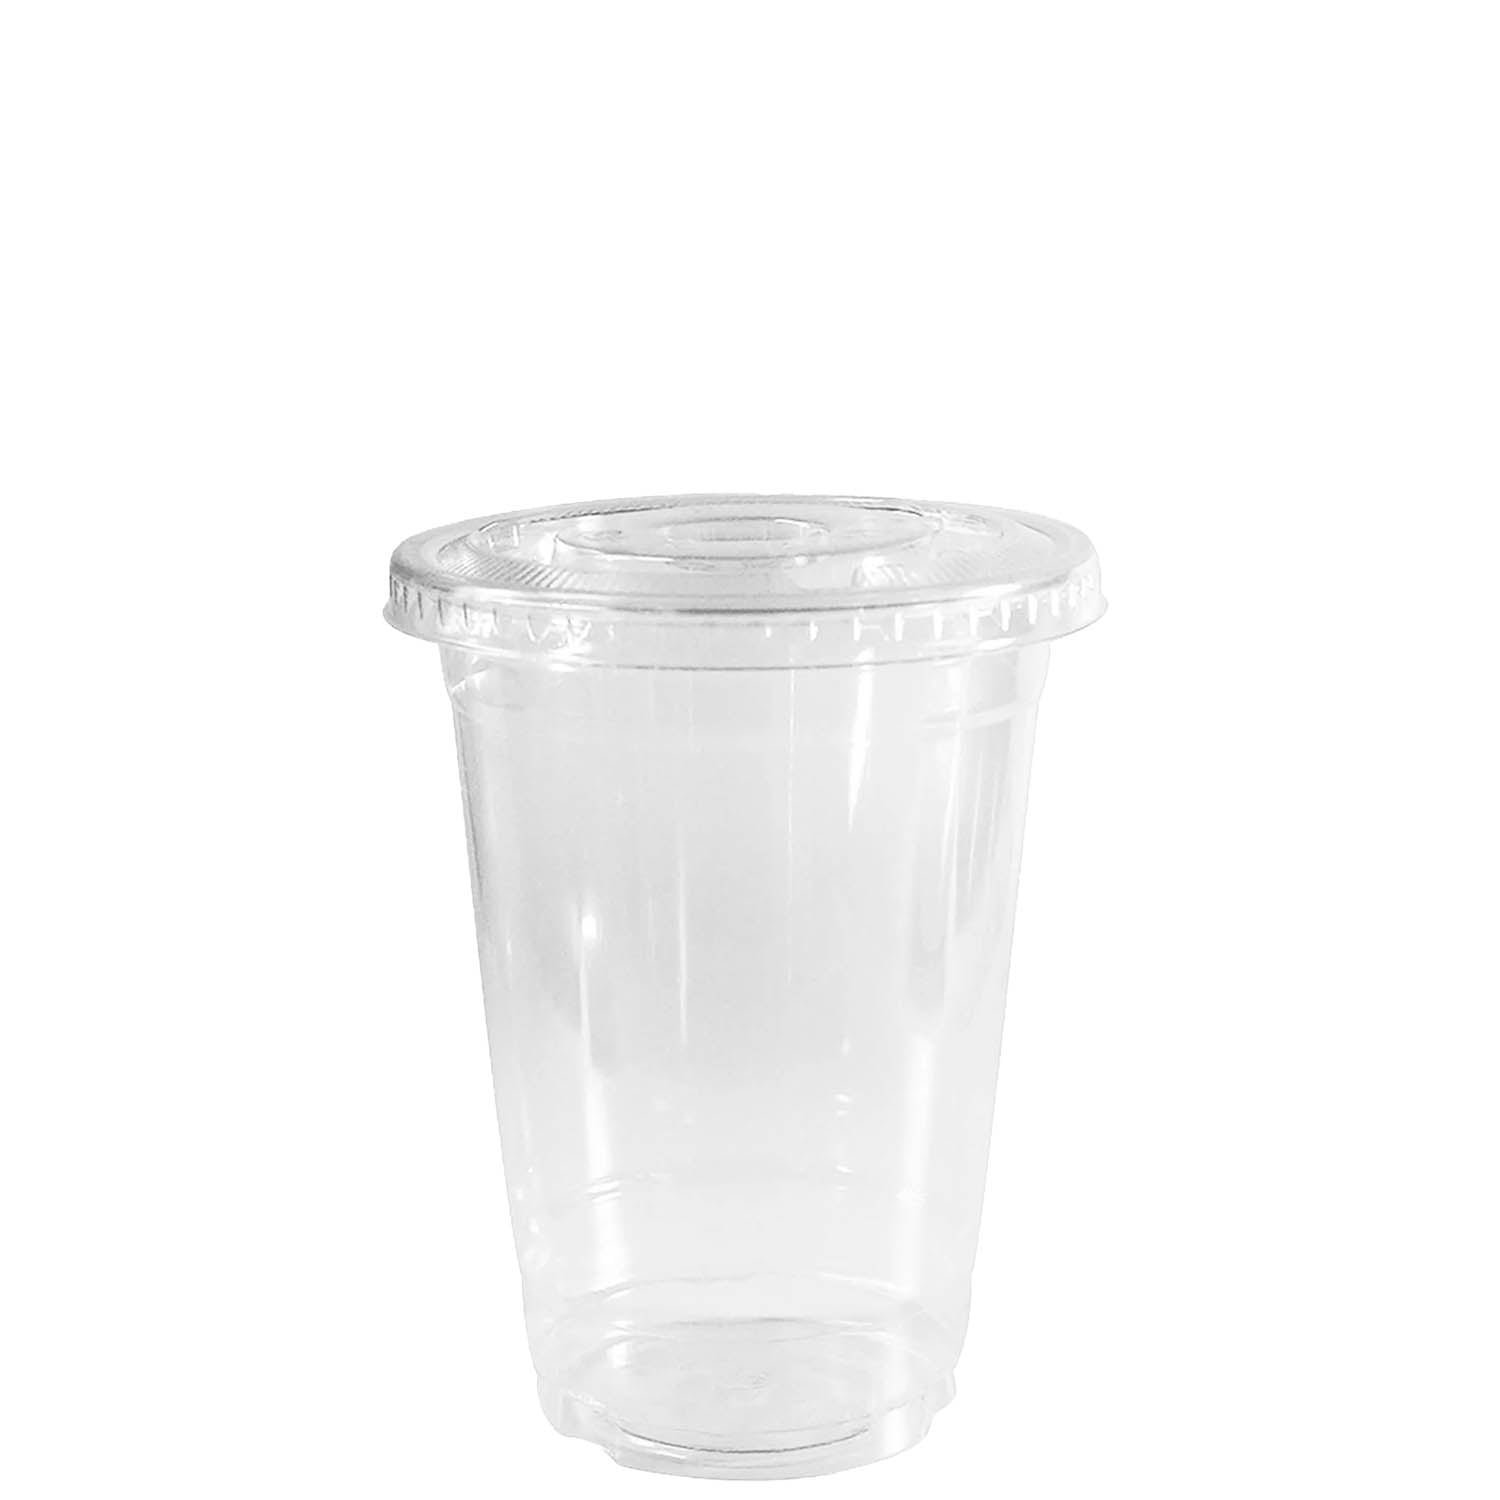 14 oz. Golf Ball Molded Reusable BPA-Free Plastic Cups with Lids